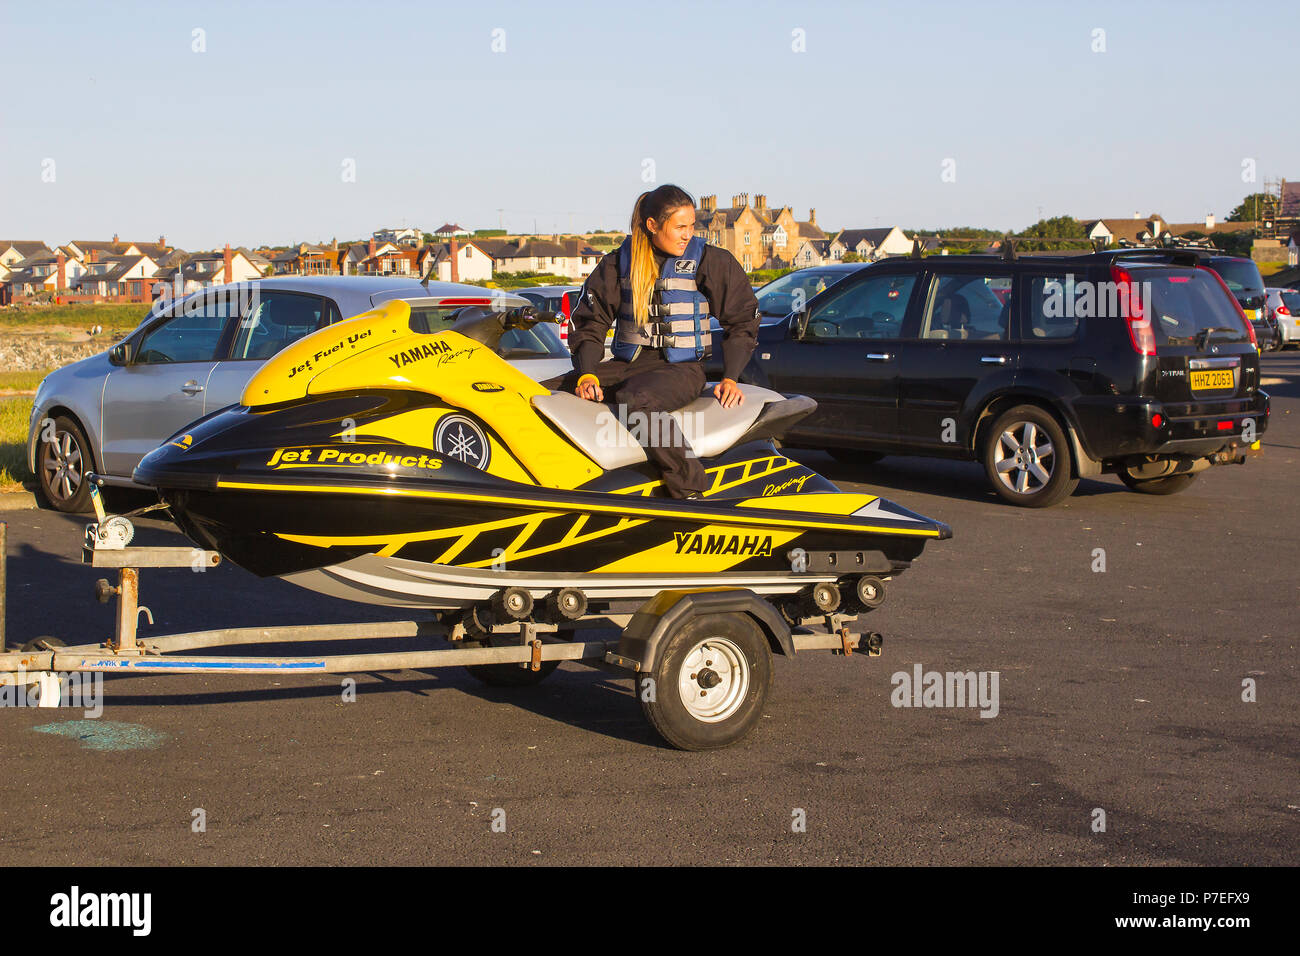 29 June 2018 A young woman in wet gear sits on a powerful Yamaha Jet-Ski at Groomsport Harbour Northern Ireland in preparation for launching Stock Photo